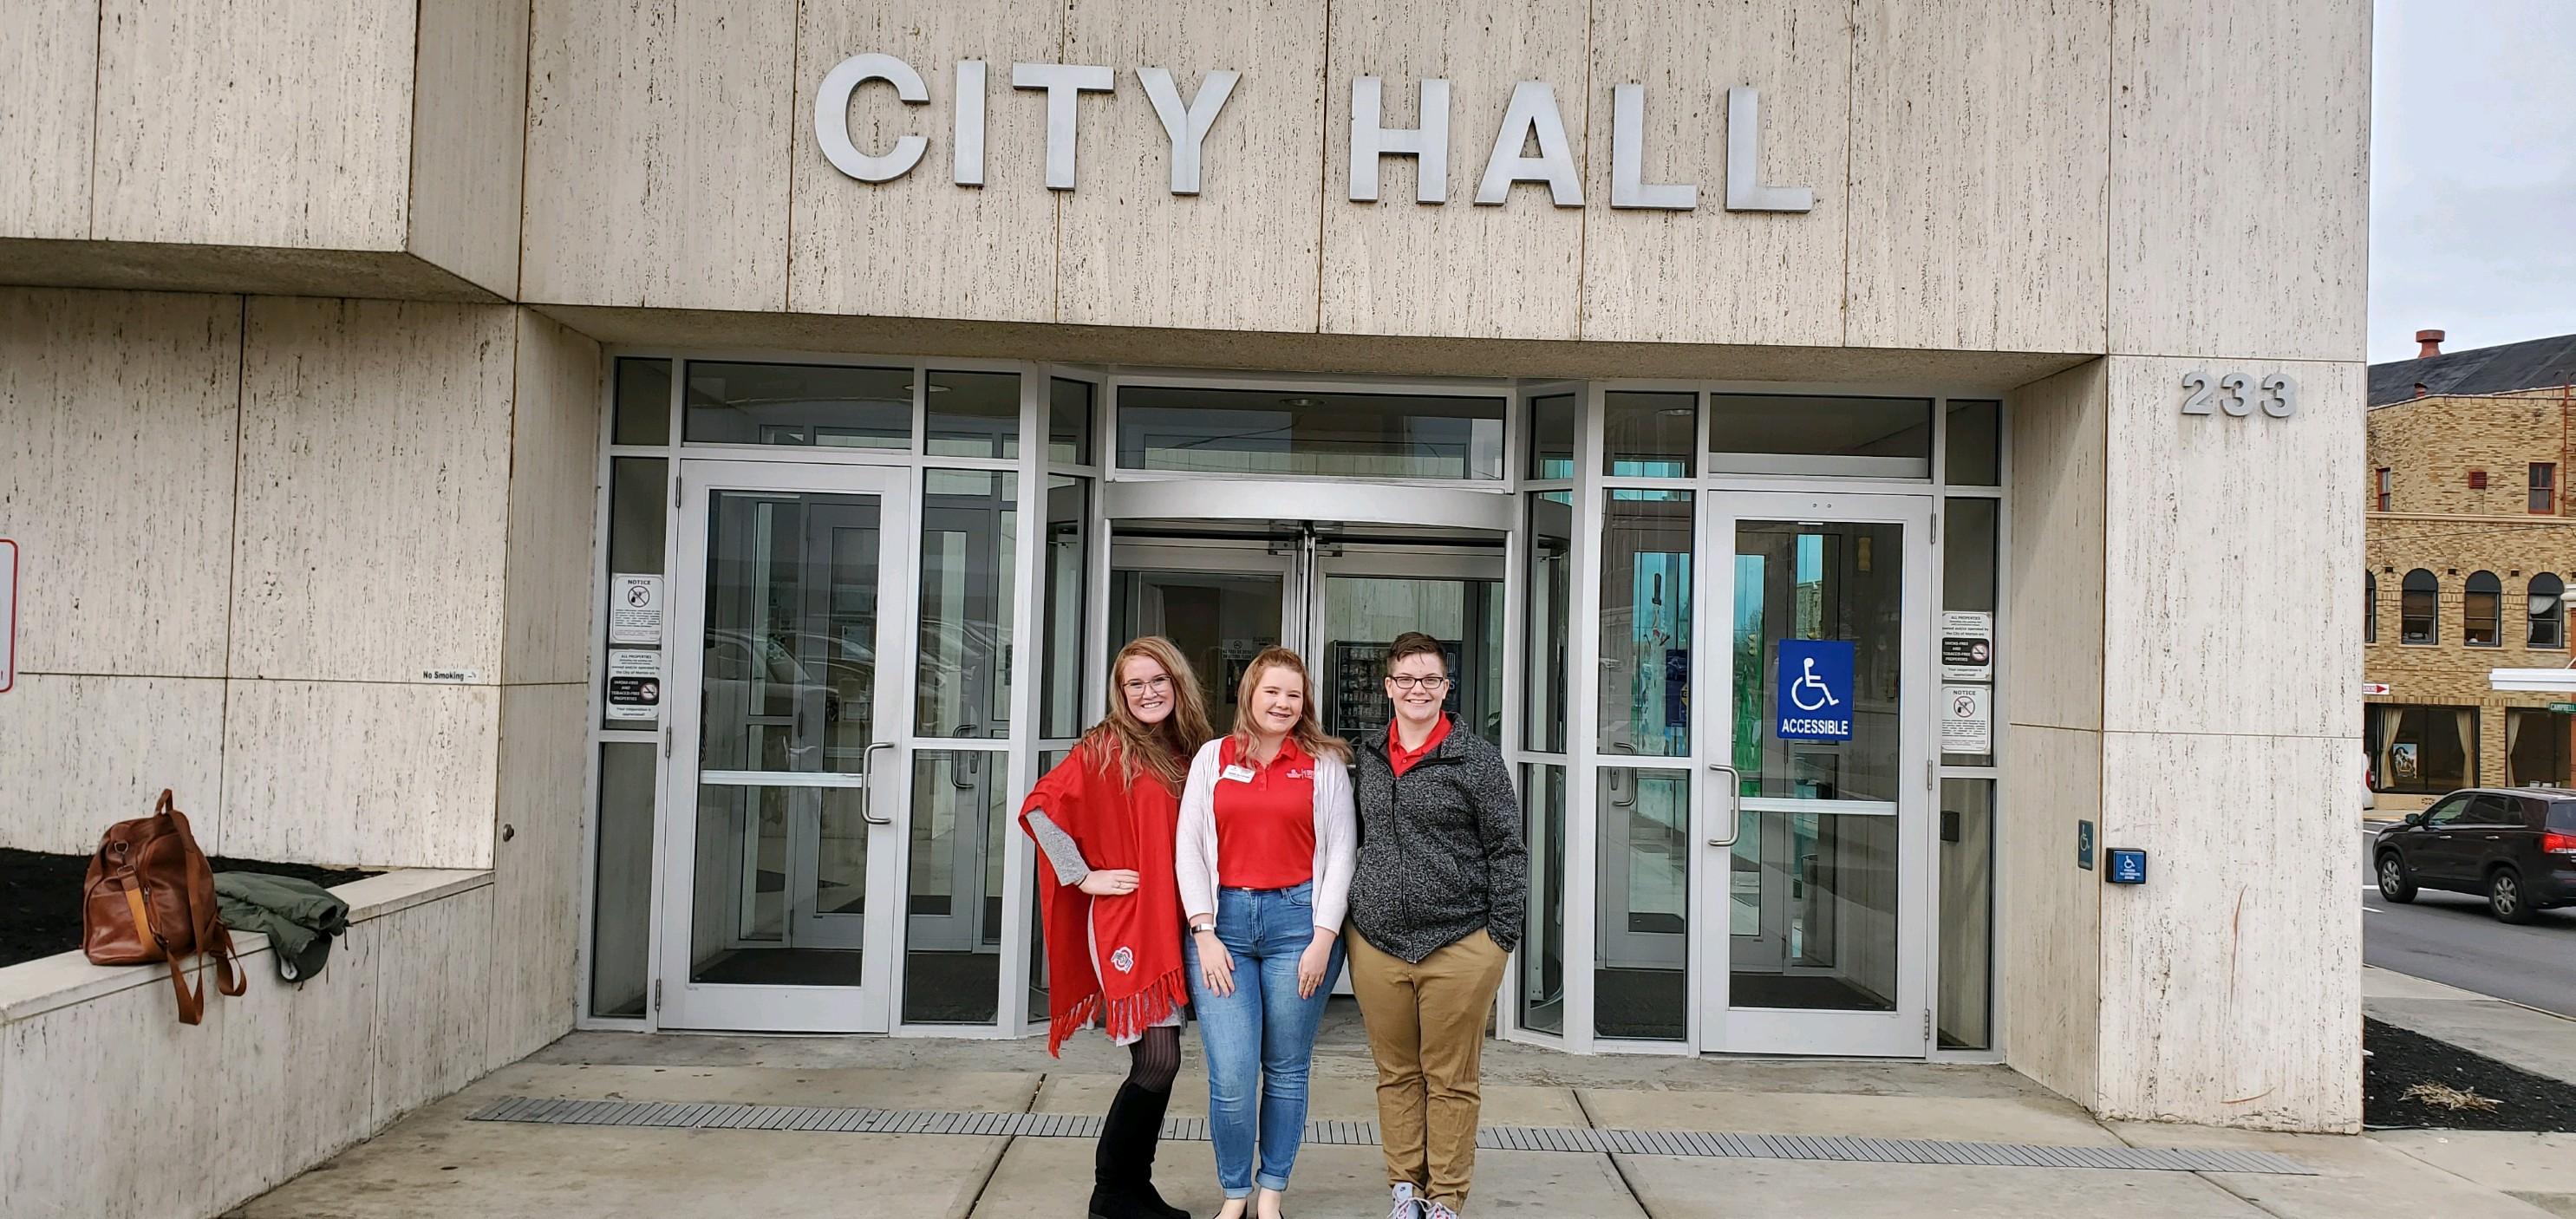 Students of The Ohio State University at Marion from left to right: Caroline Anderson, Amber Alexander, and Kaleigh Seibert